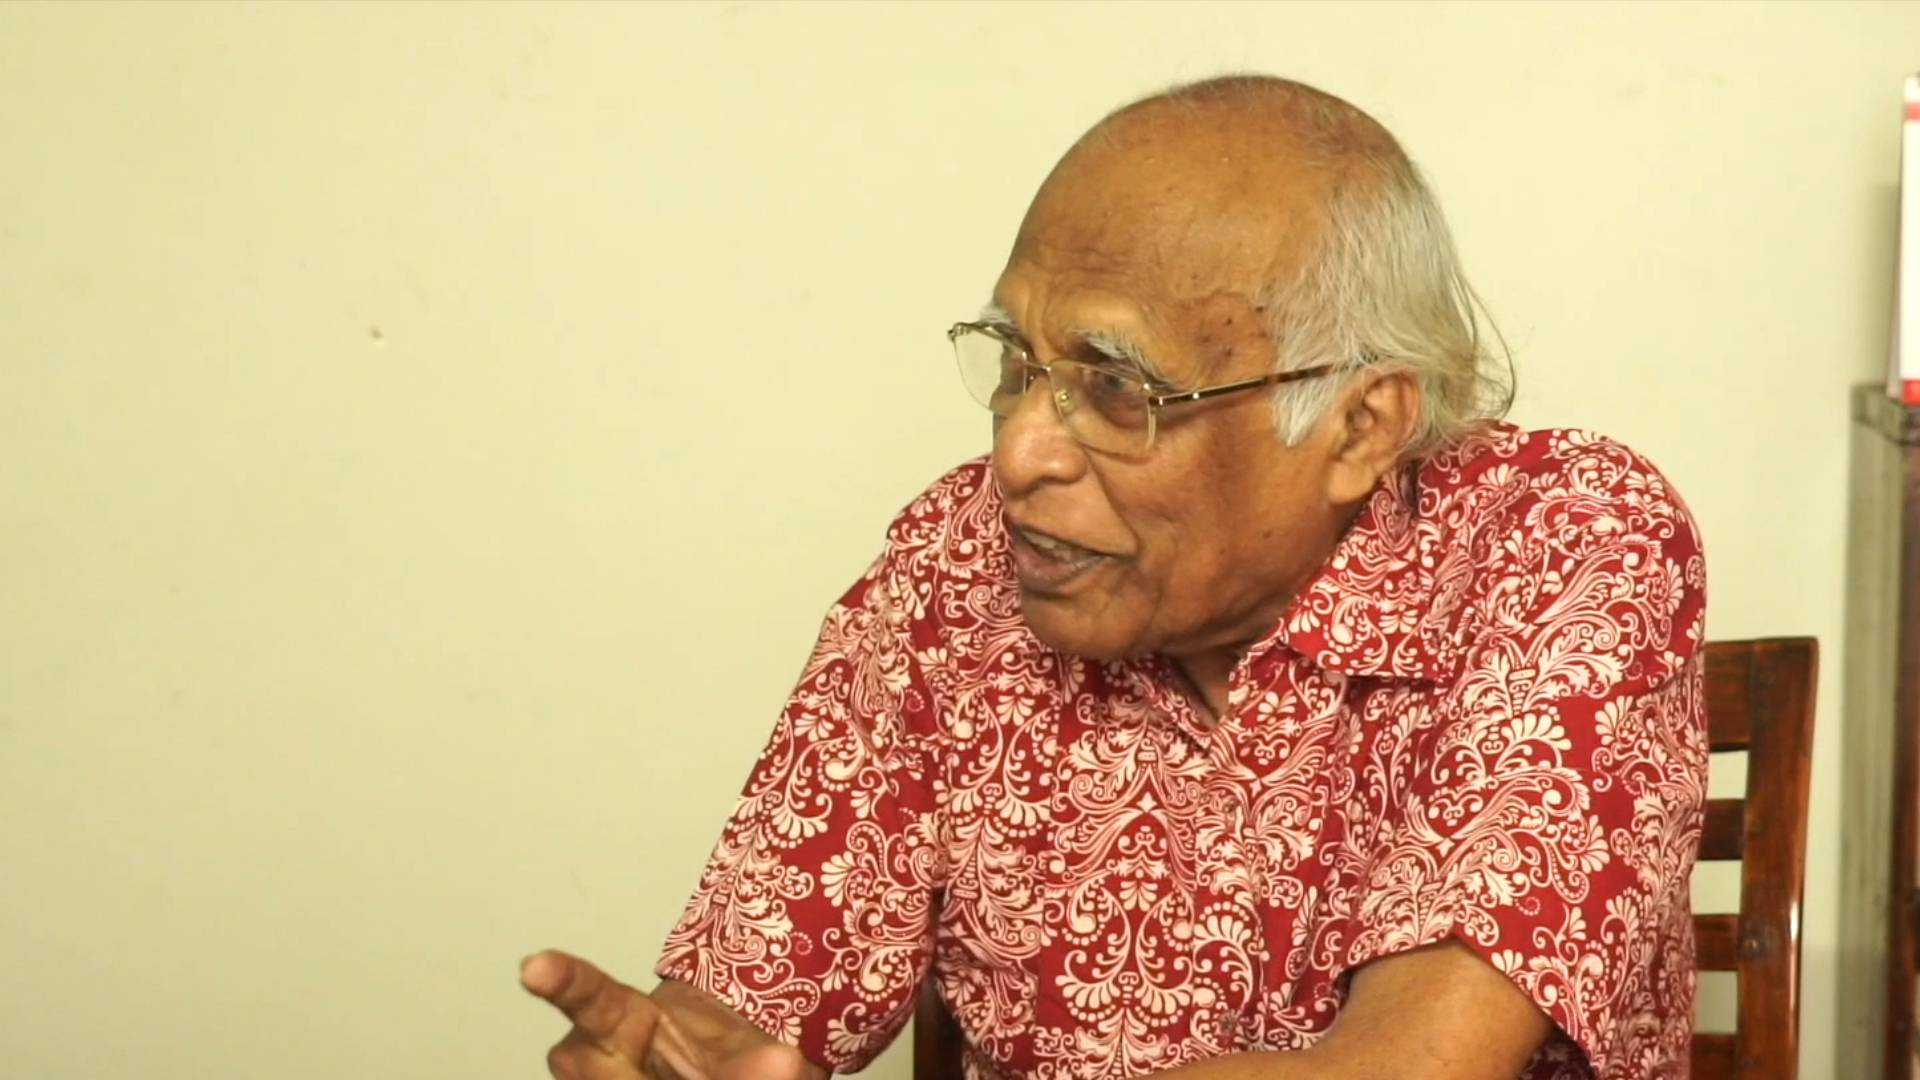 GLOBALink | CPC's theories worthwhile for world: Former Sri Lankan communist leader